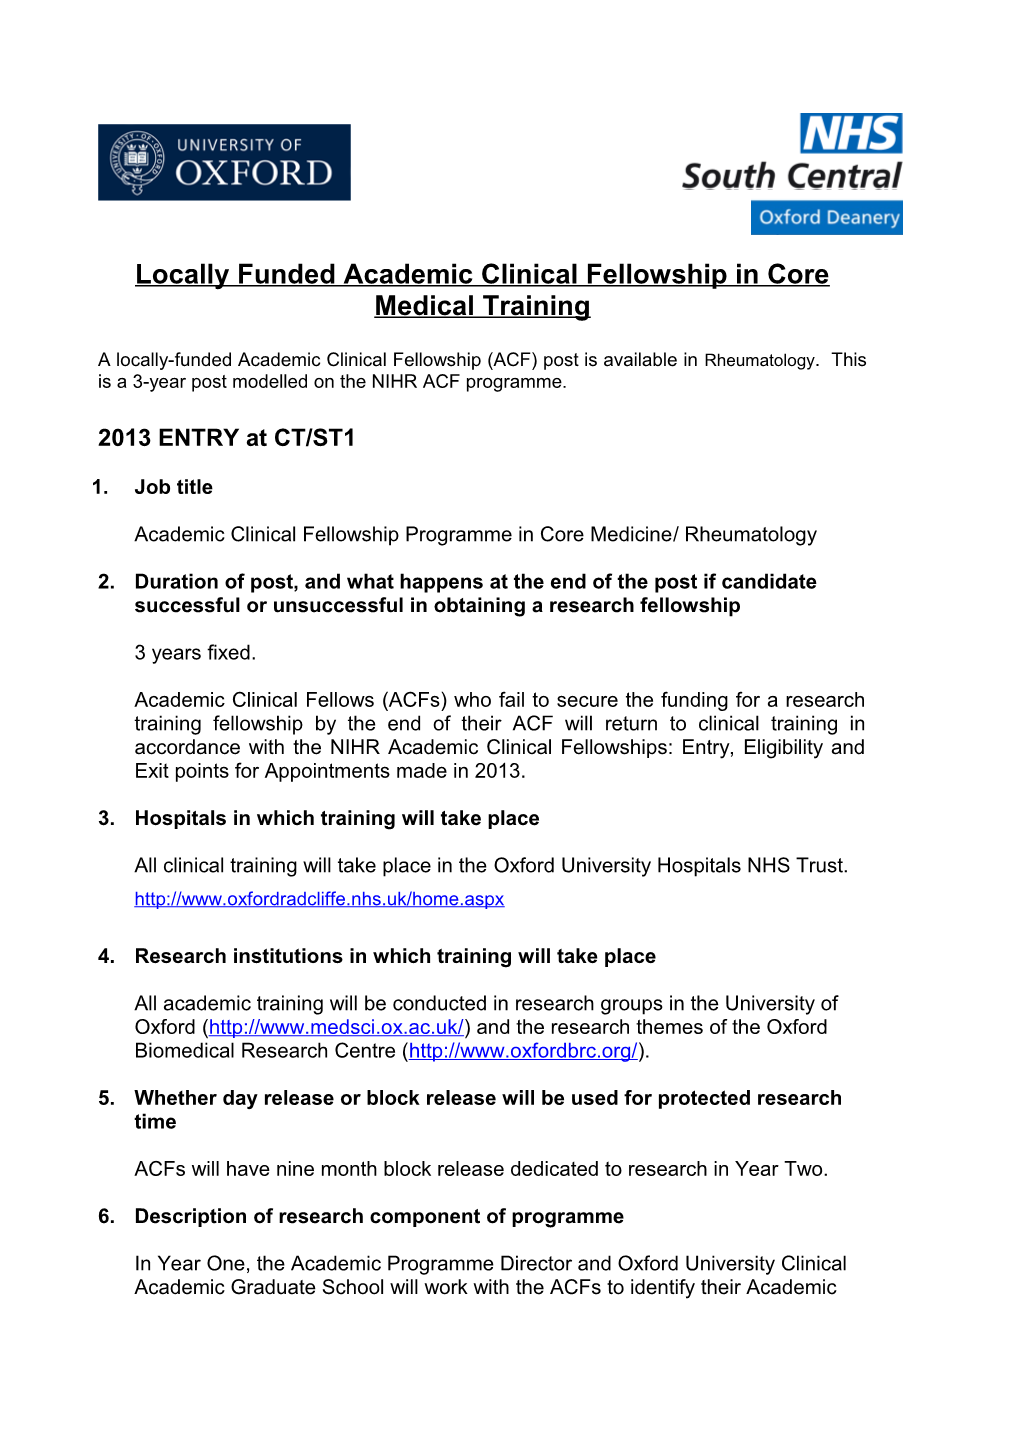 Locally Funded Academic Clinical Fellowship in Core Medical Training